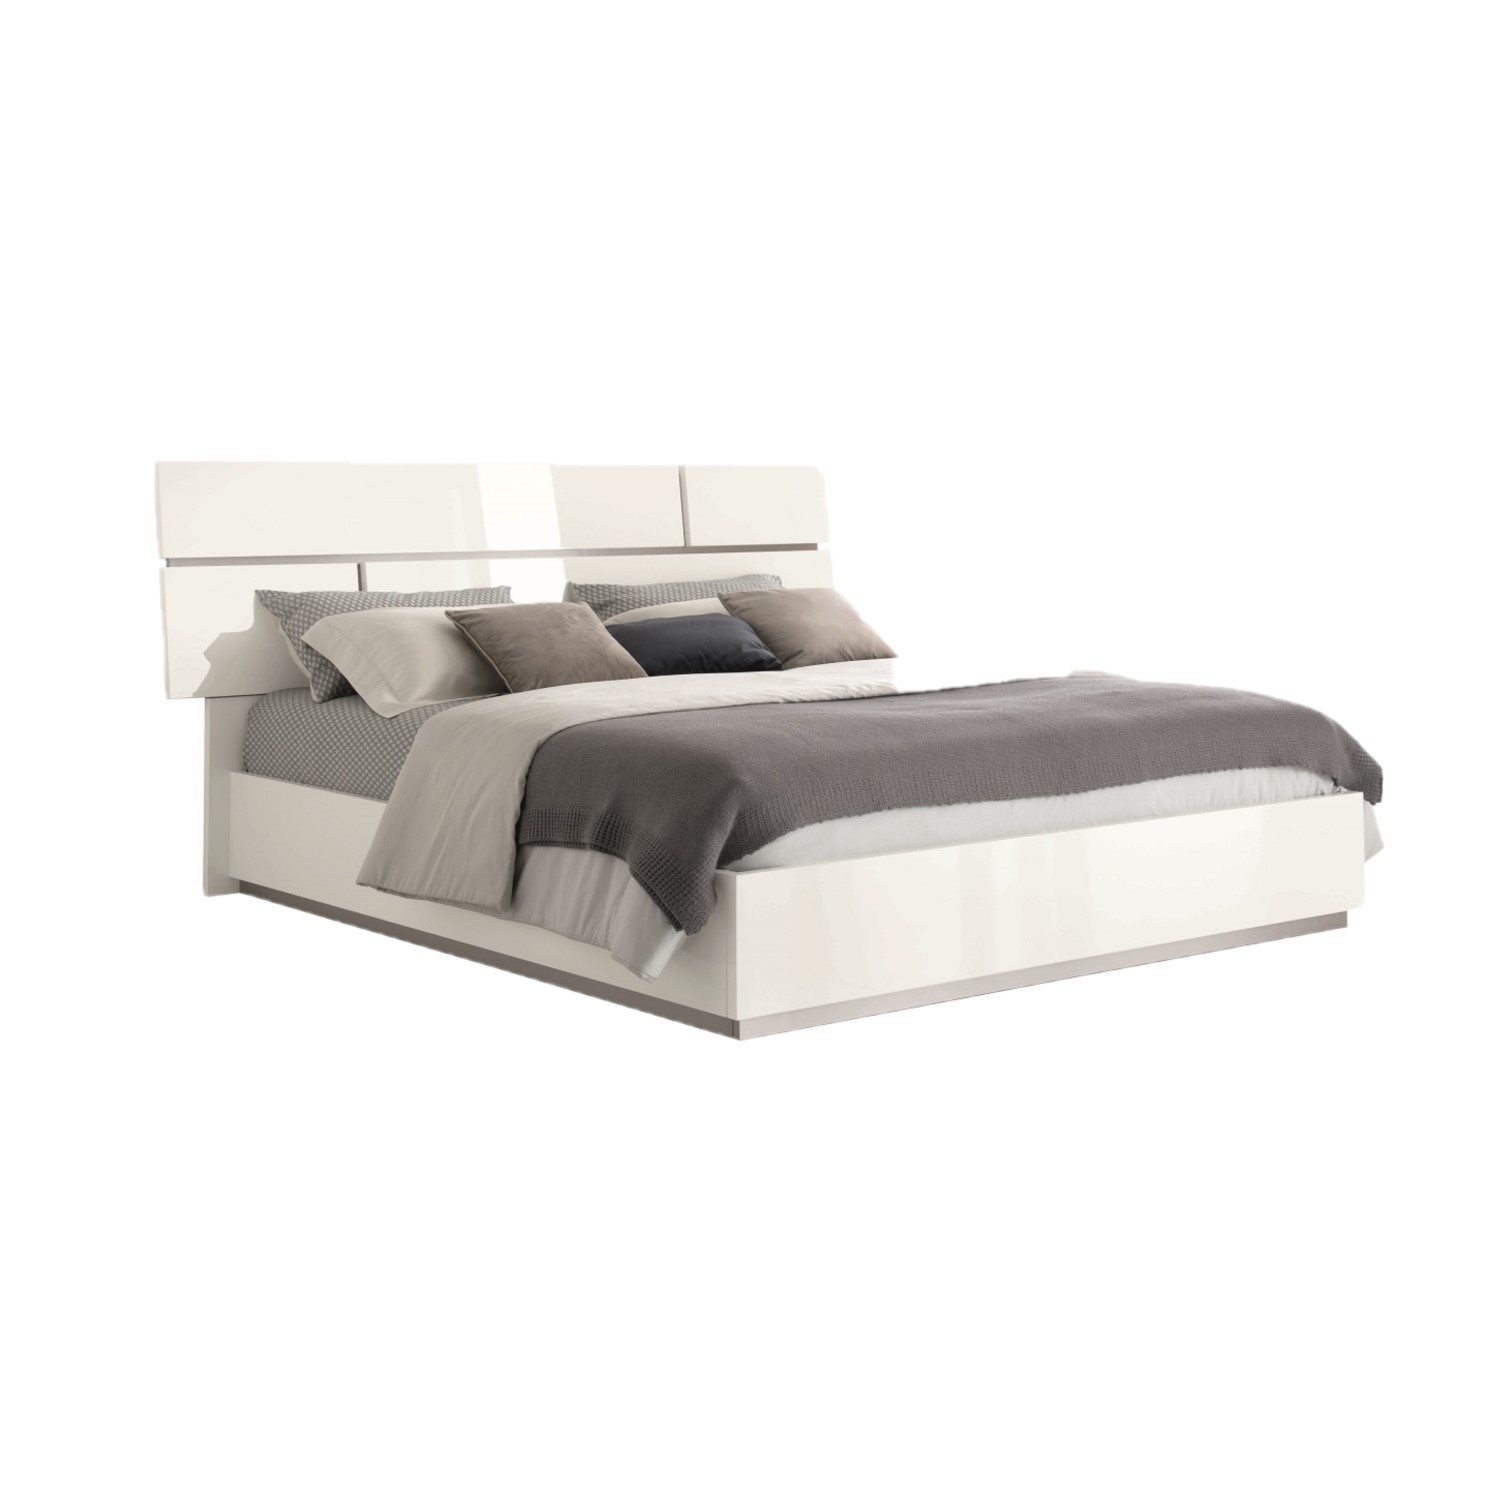 BLANCO King Bed